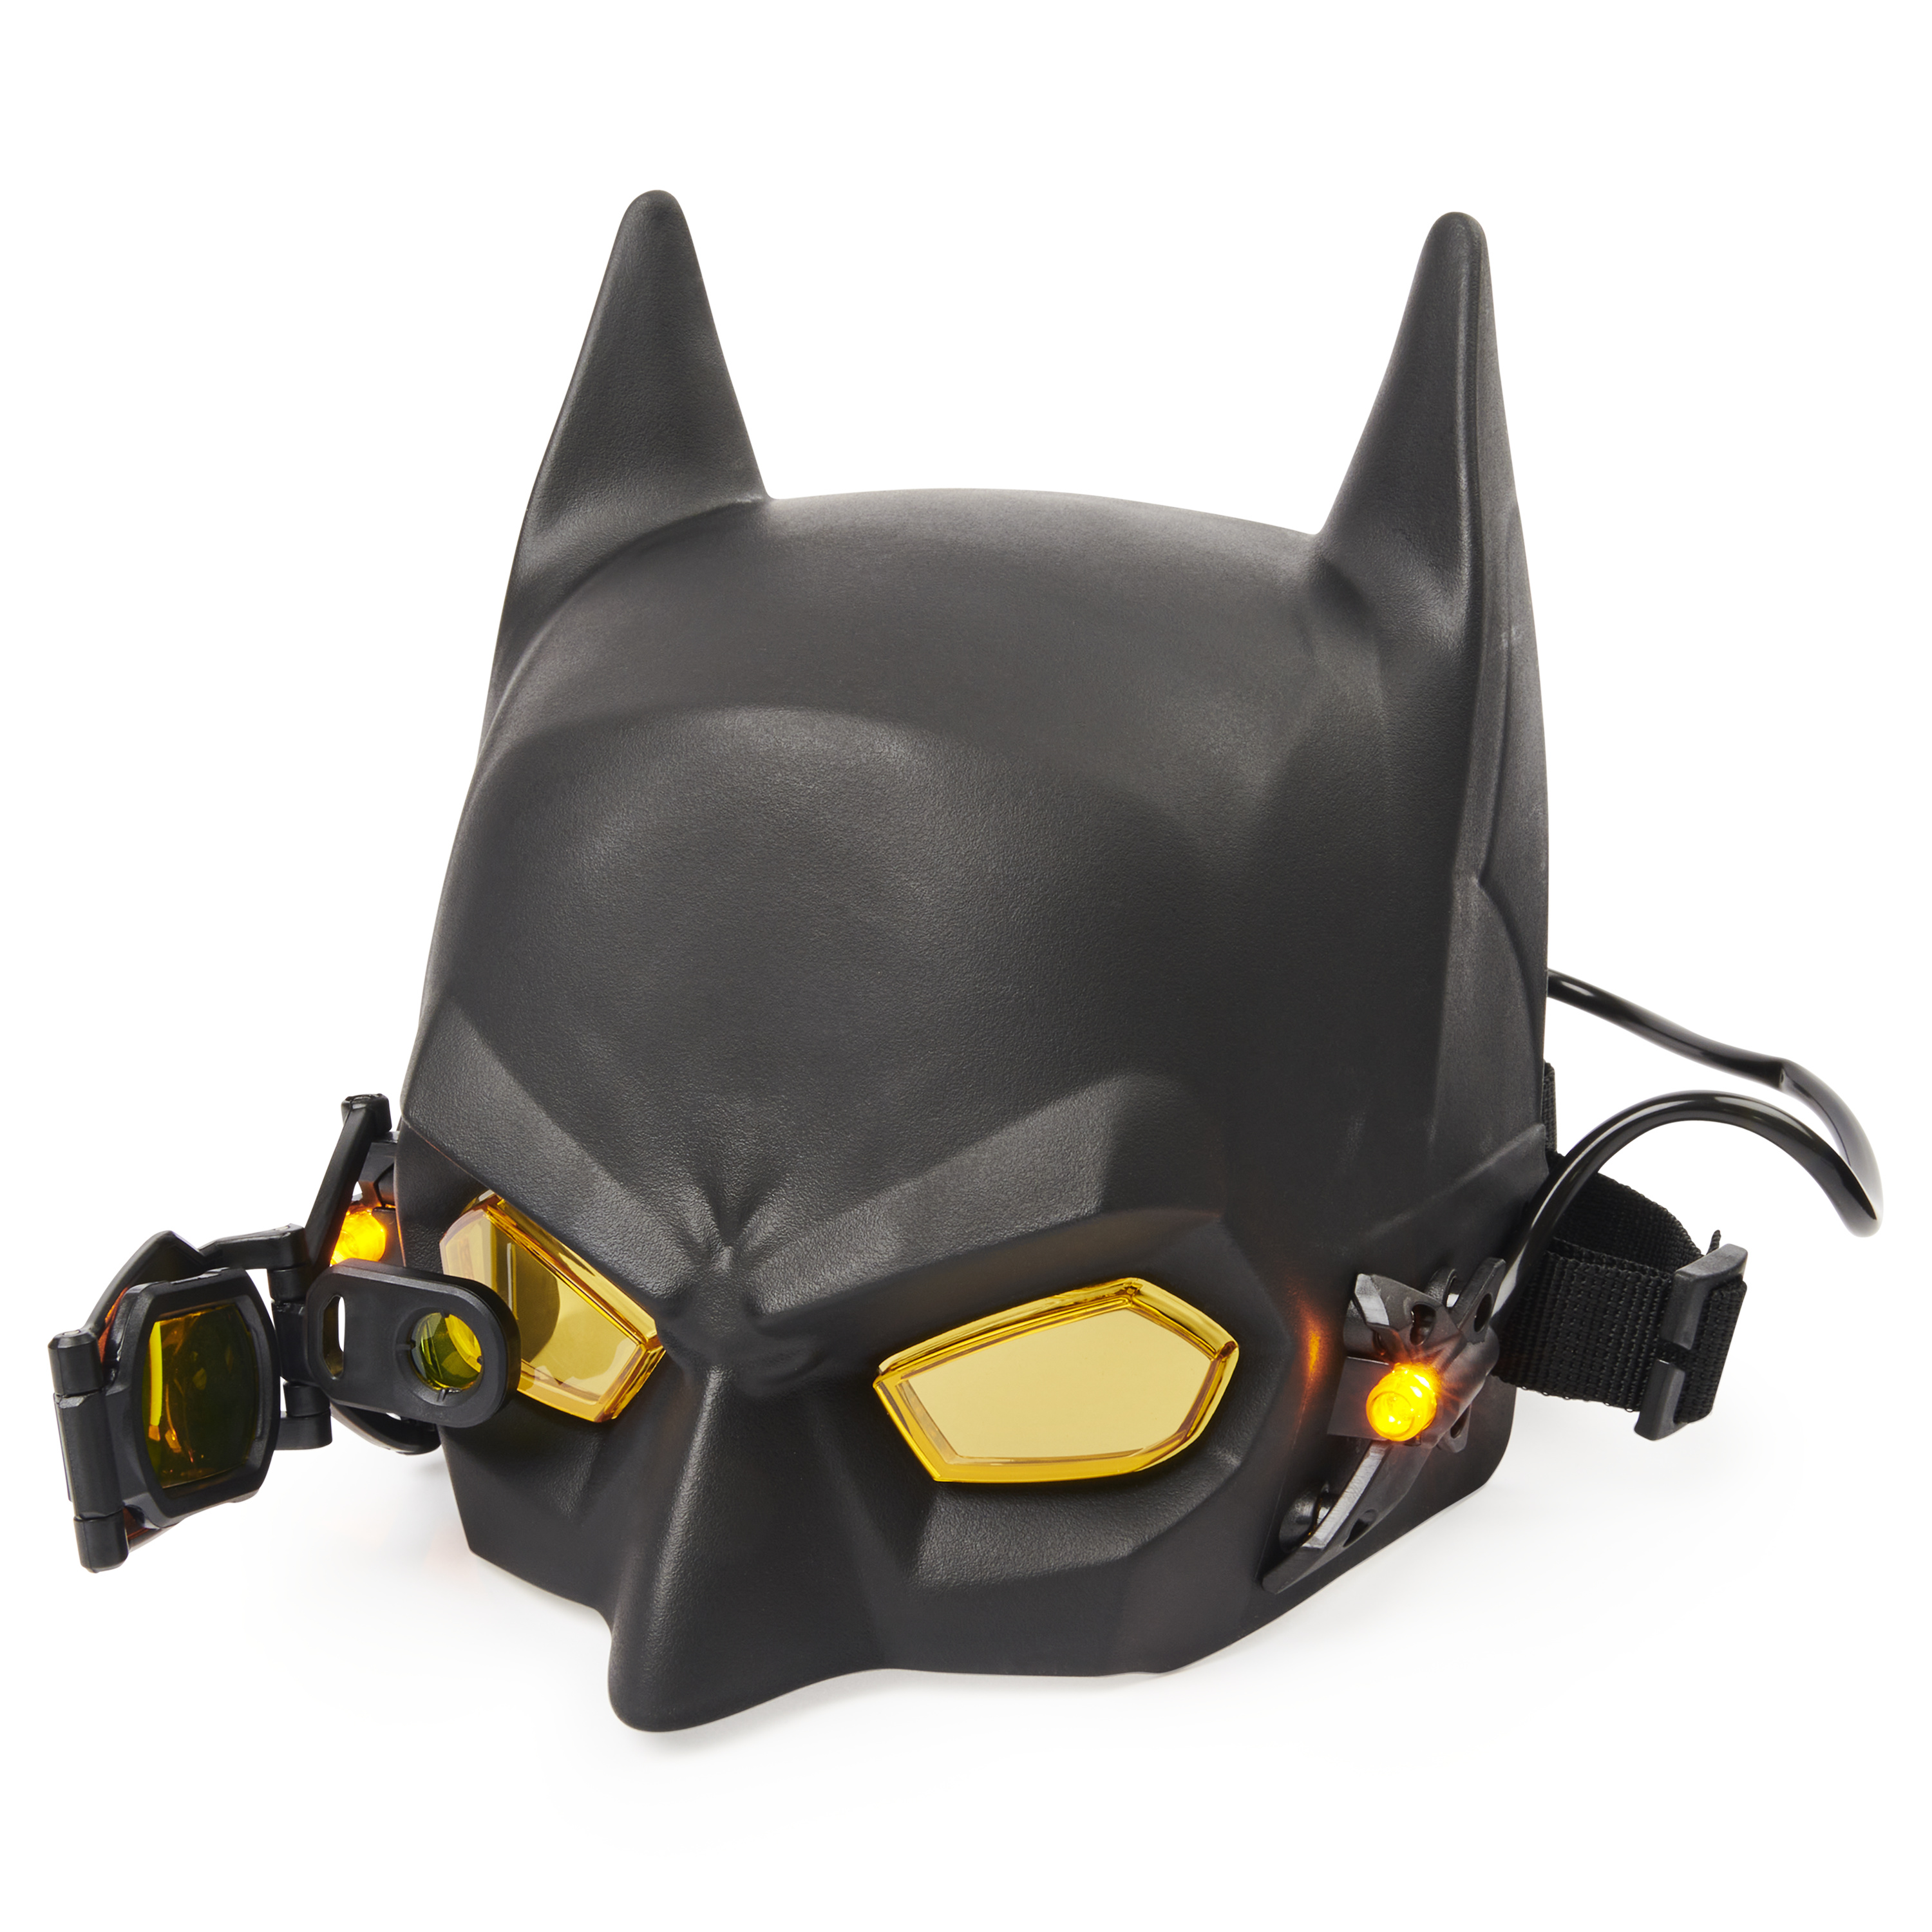 Batman Role-Play Tech Mask with Lights and Magnification Lens, for Kids Aged 4 and up - image 3 of 7